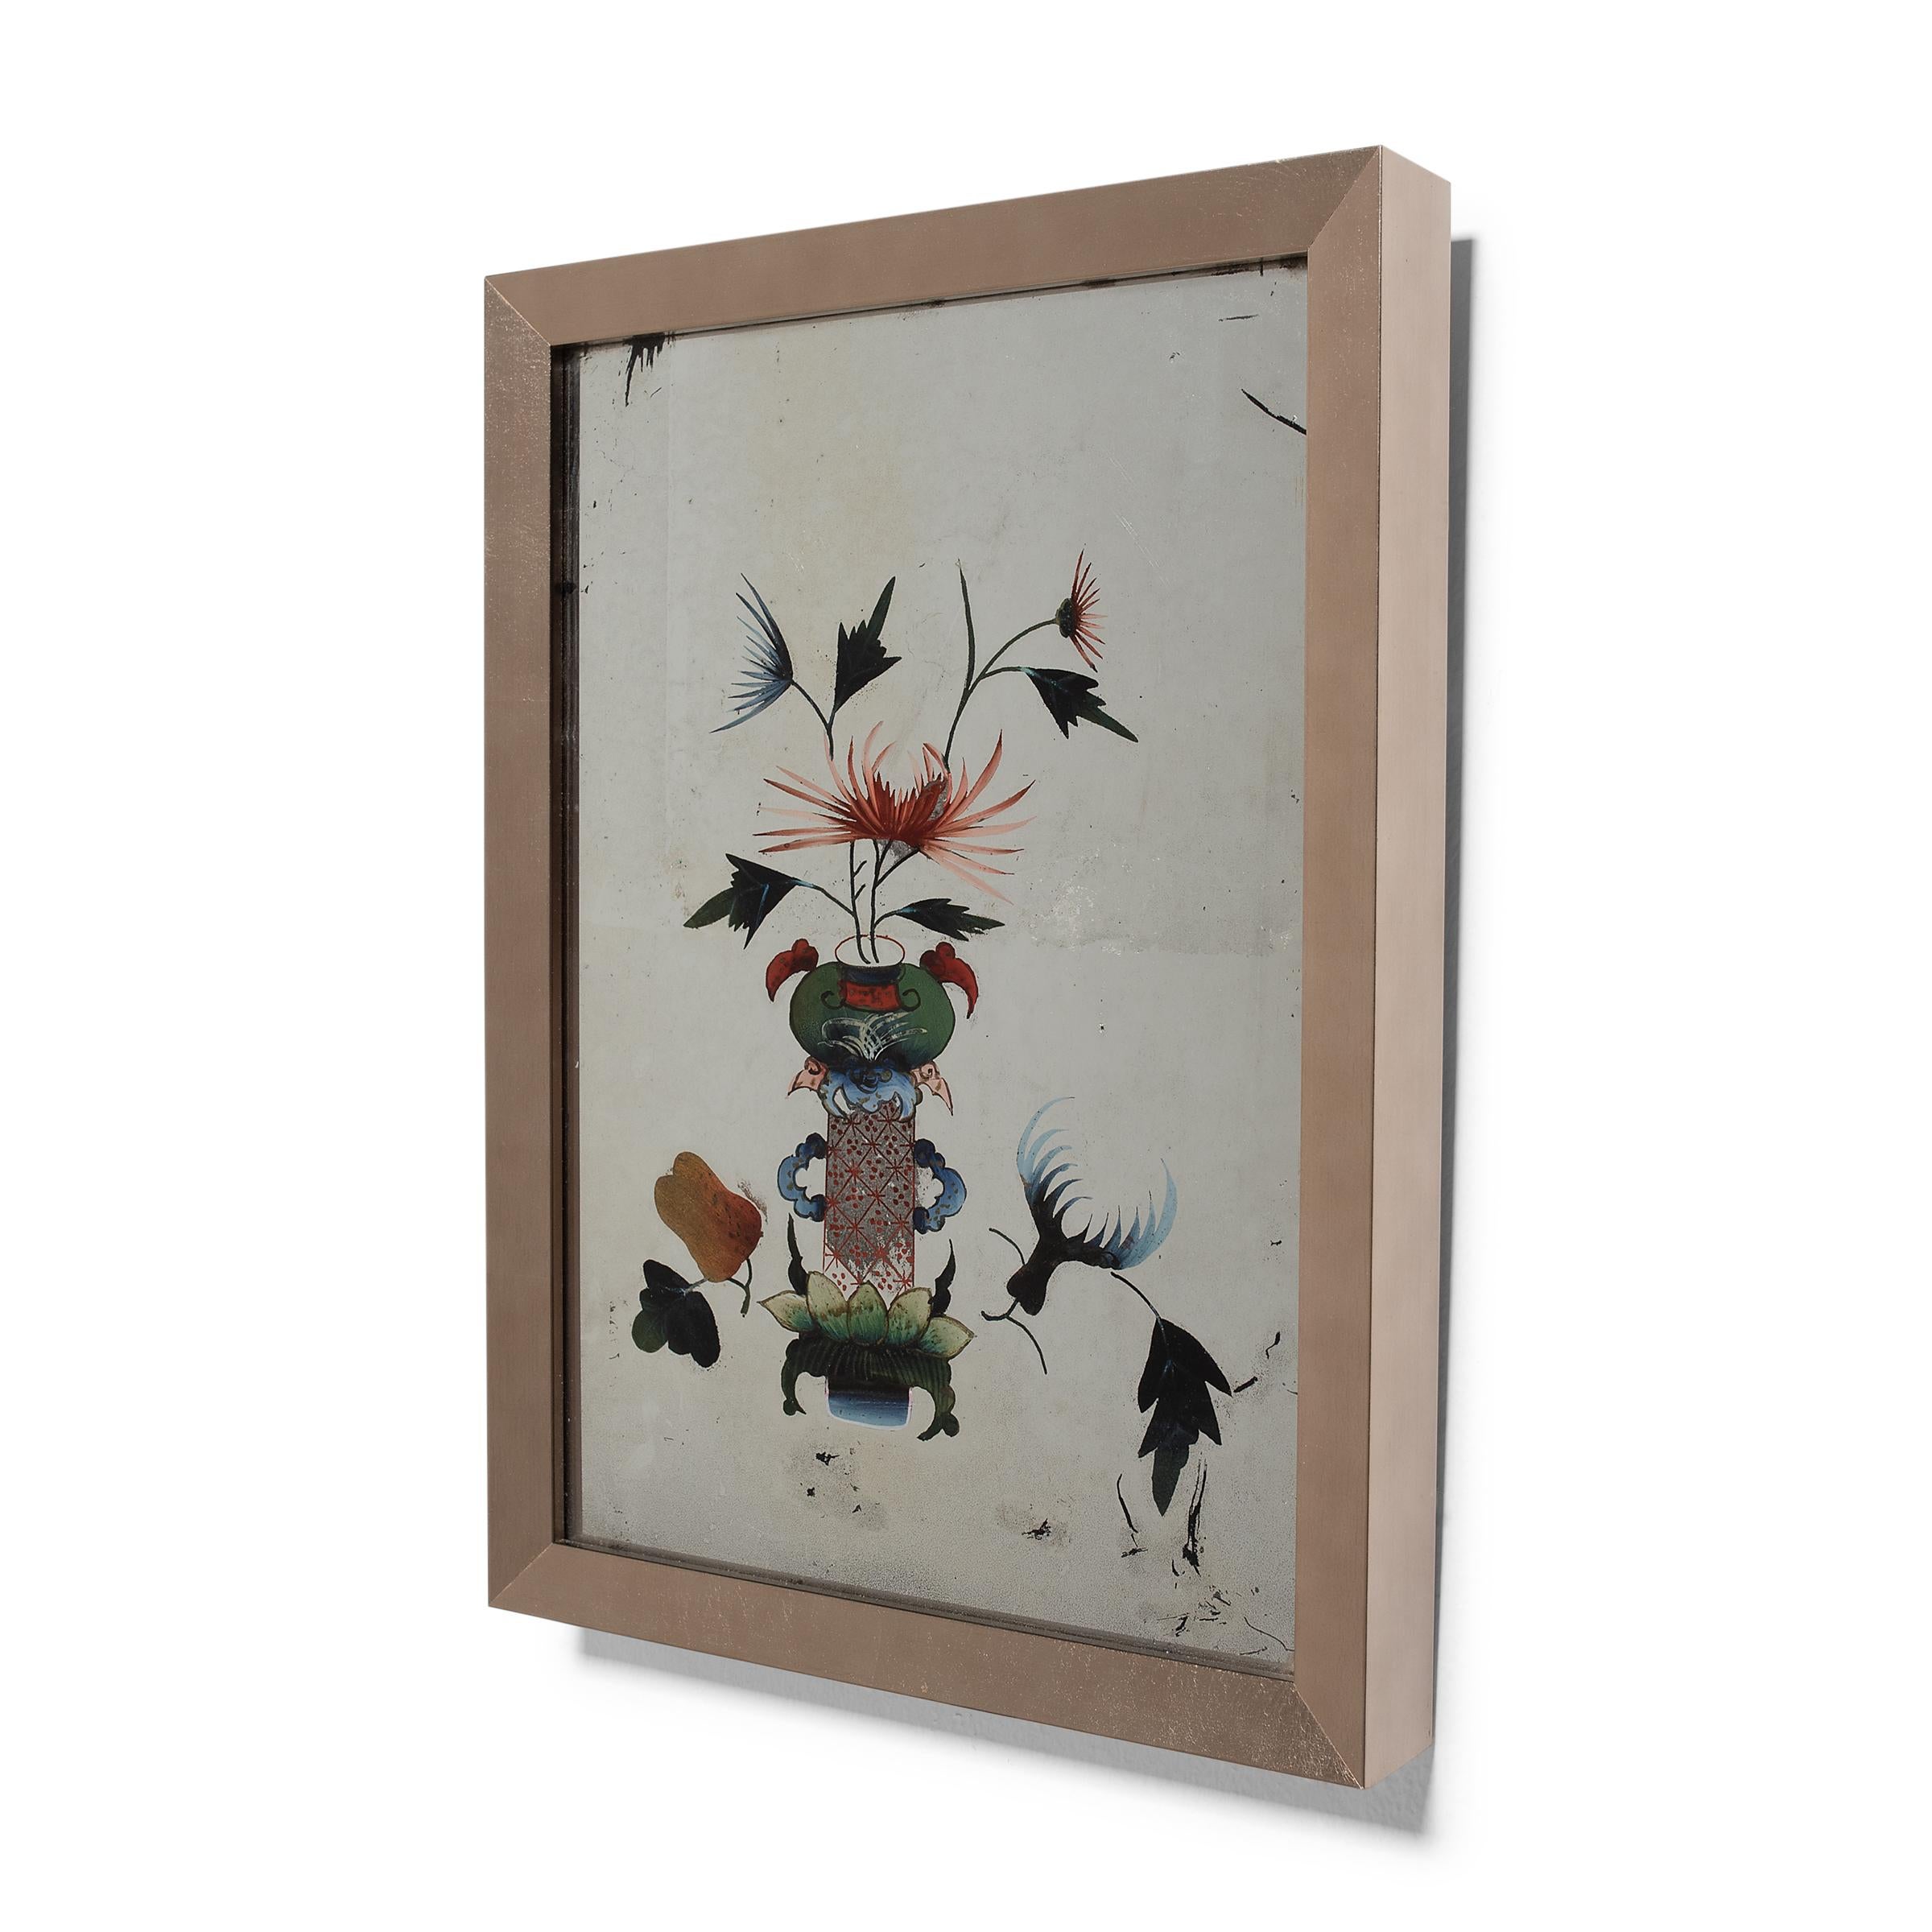 This colorful floral still life is a charming example of Chinese reverse glass painting. Popularized during the Qing dynasty, reverse glass painting requires an artist to essentially work backwards, starting with details and shading before adding